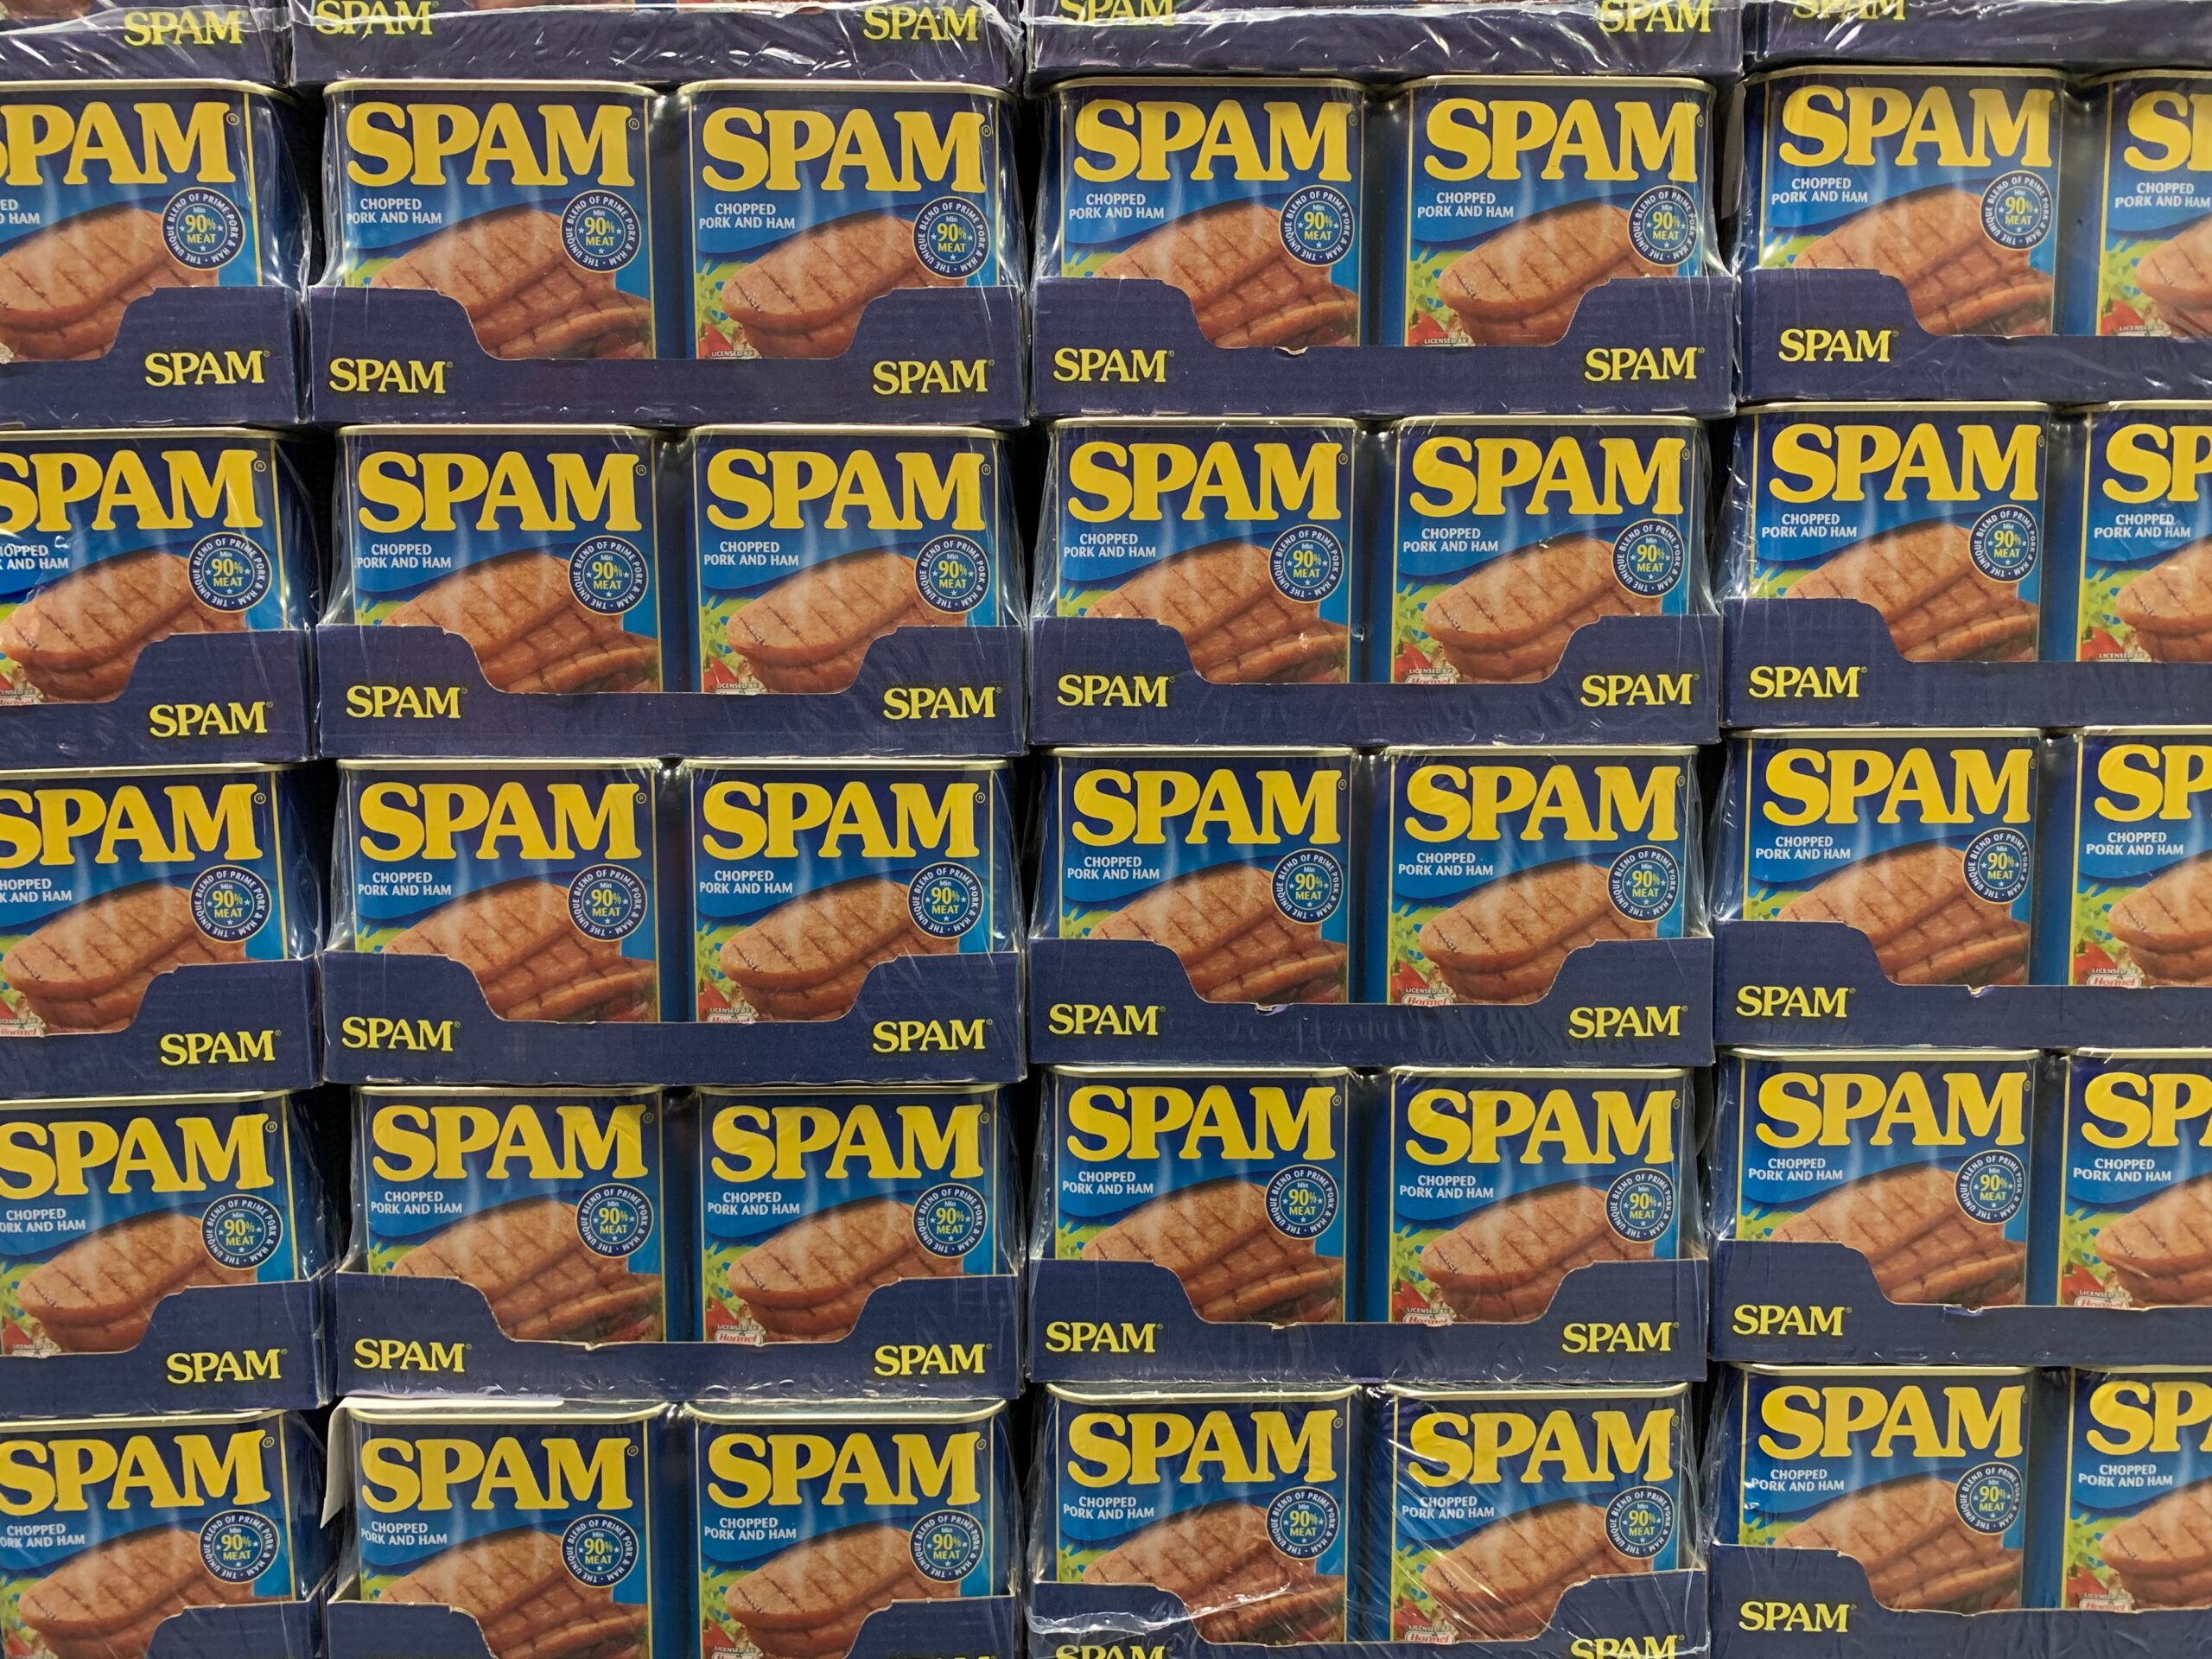 SPAM - </p>
<p>Might be fitting if you're talking about social media spam or email spam ;)